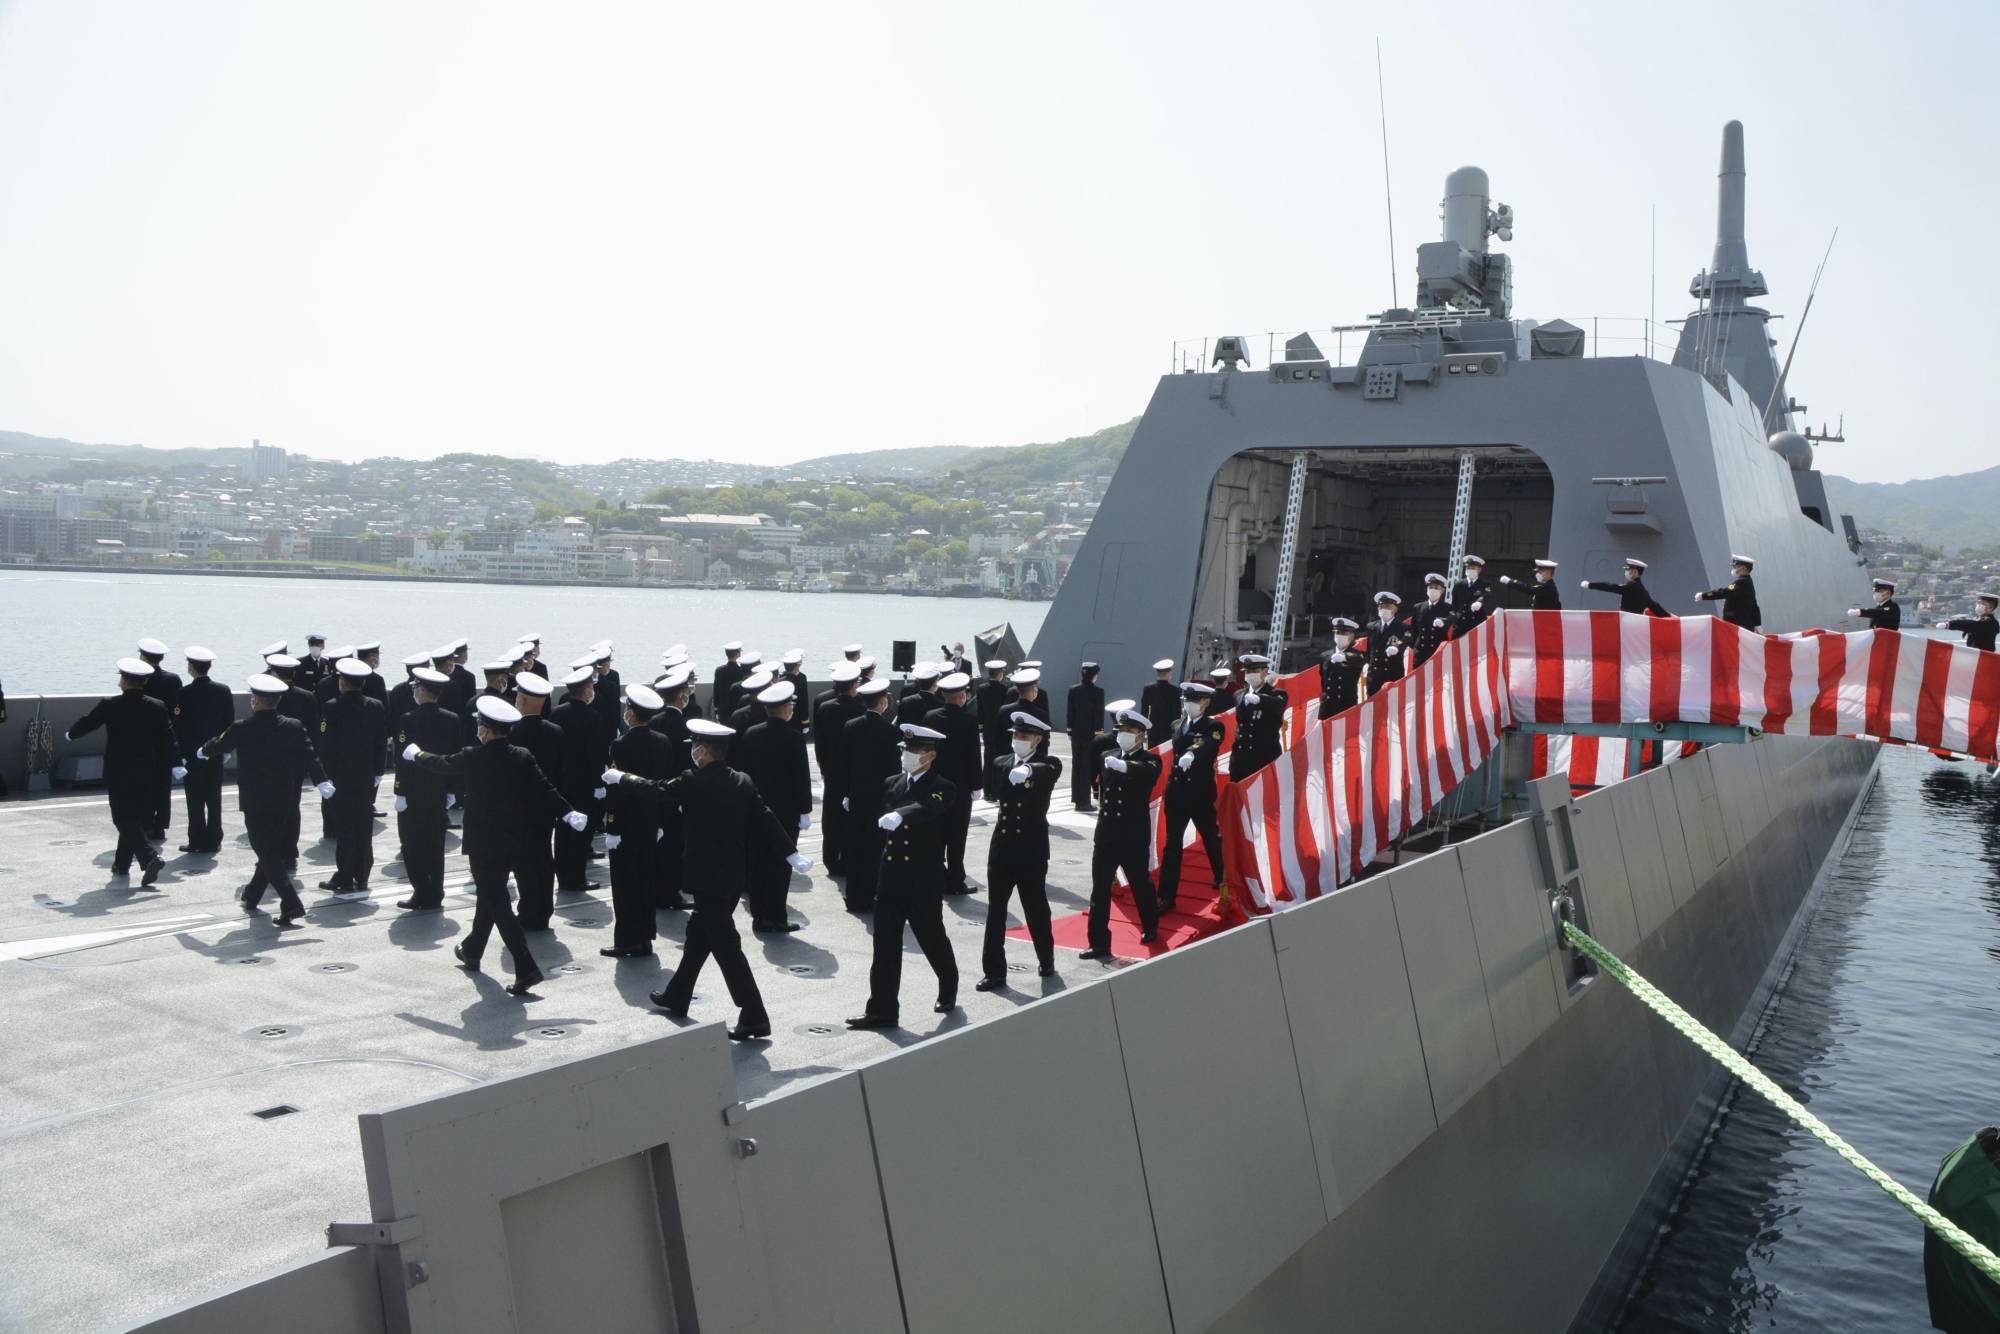 Japan is considering classifying some portions of its National Defense Program Guidelines to better deal with increased regional security threats by China, North Korea and Russia, government sources say. | KYODO